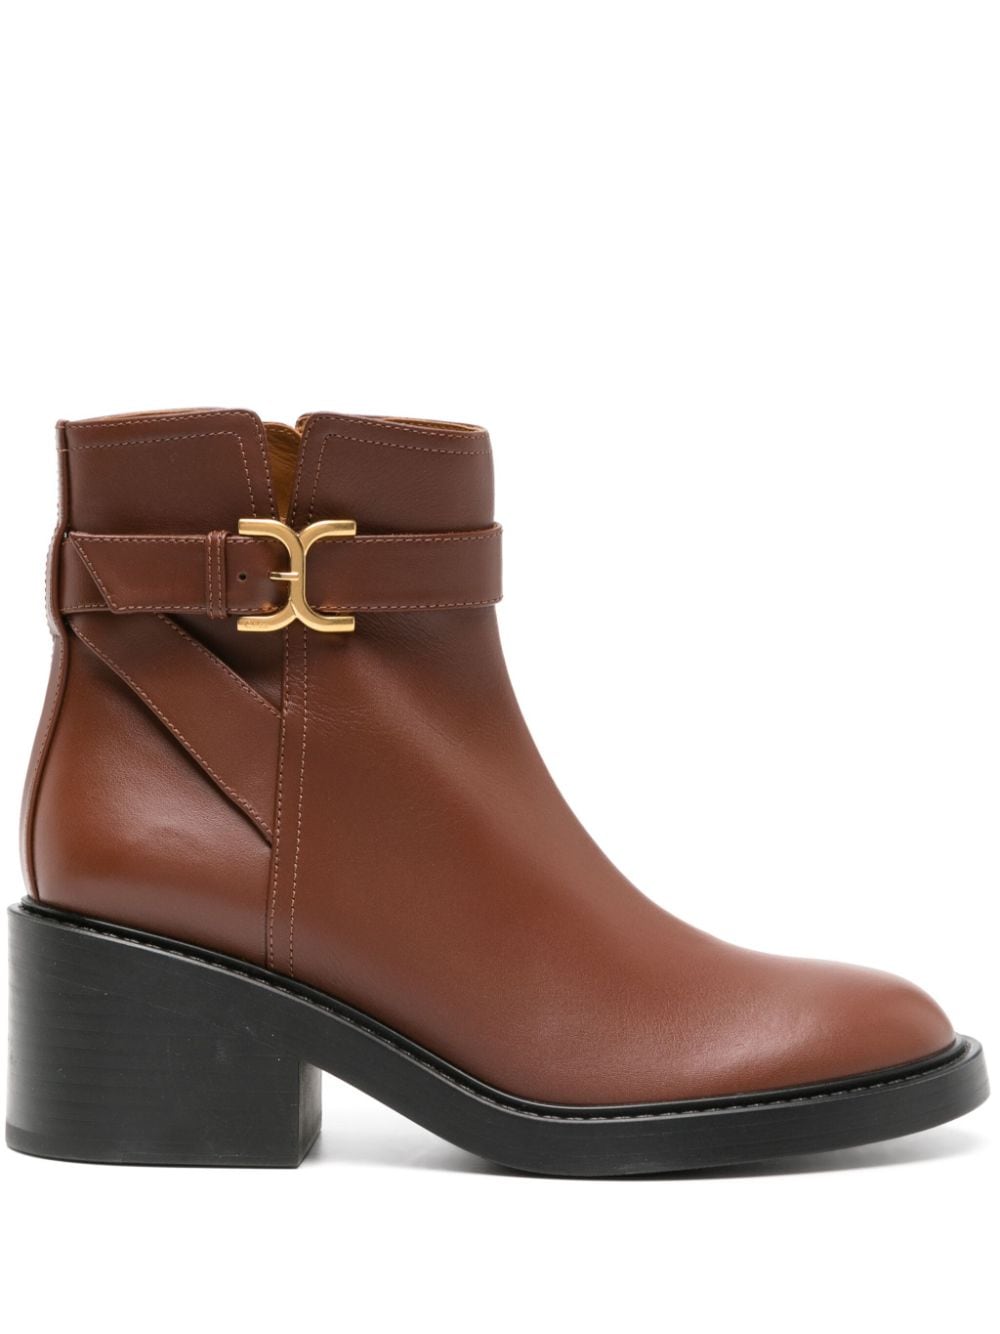 Chloé Marcie 60mm Leather Boots In Brown